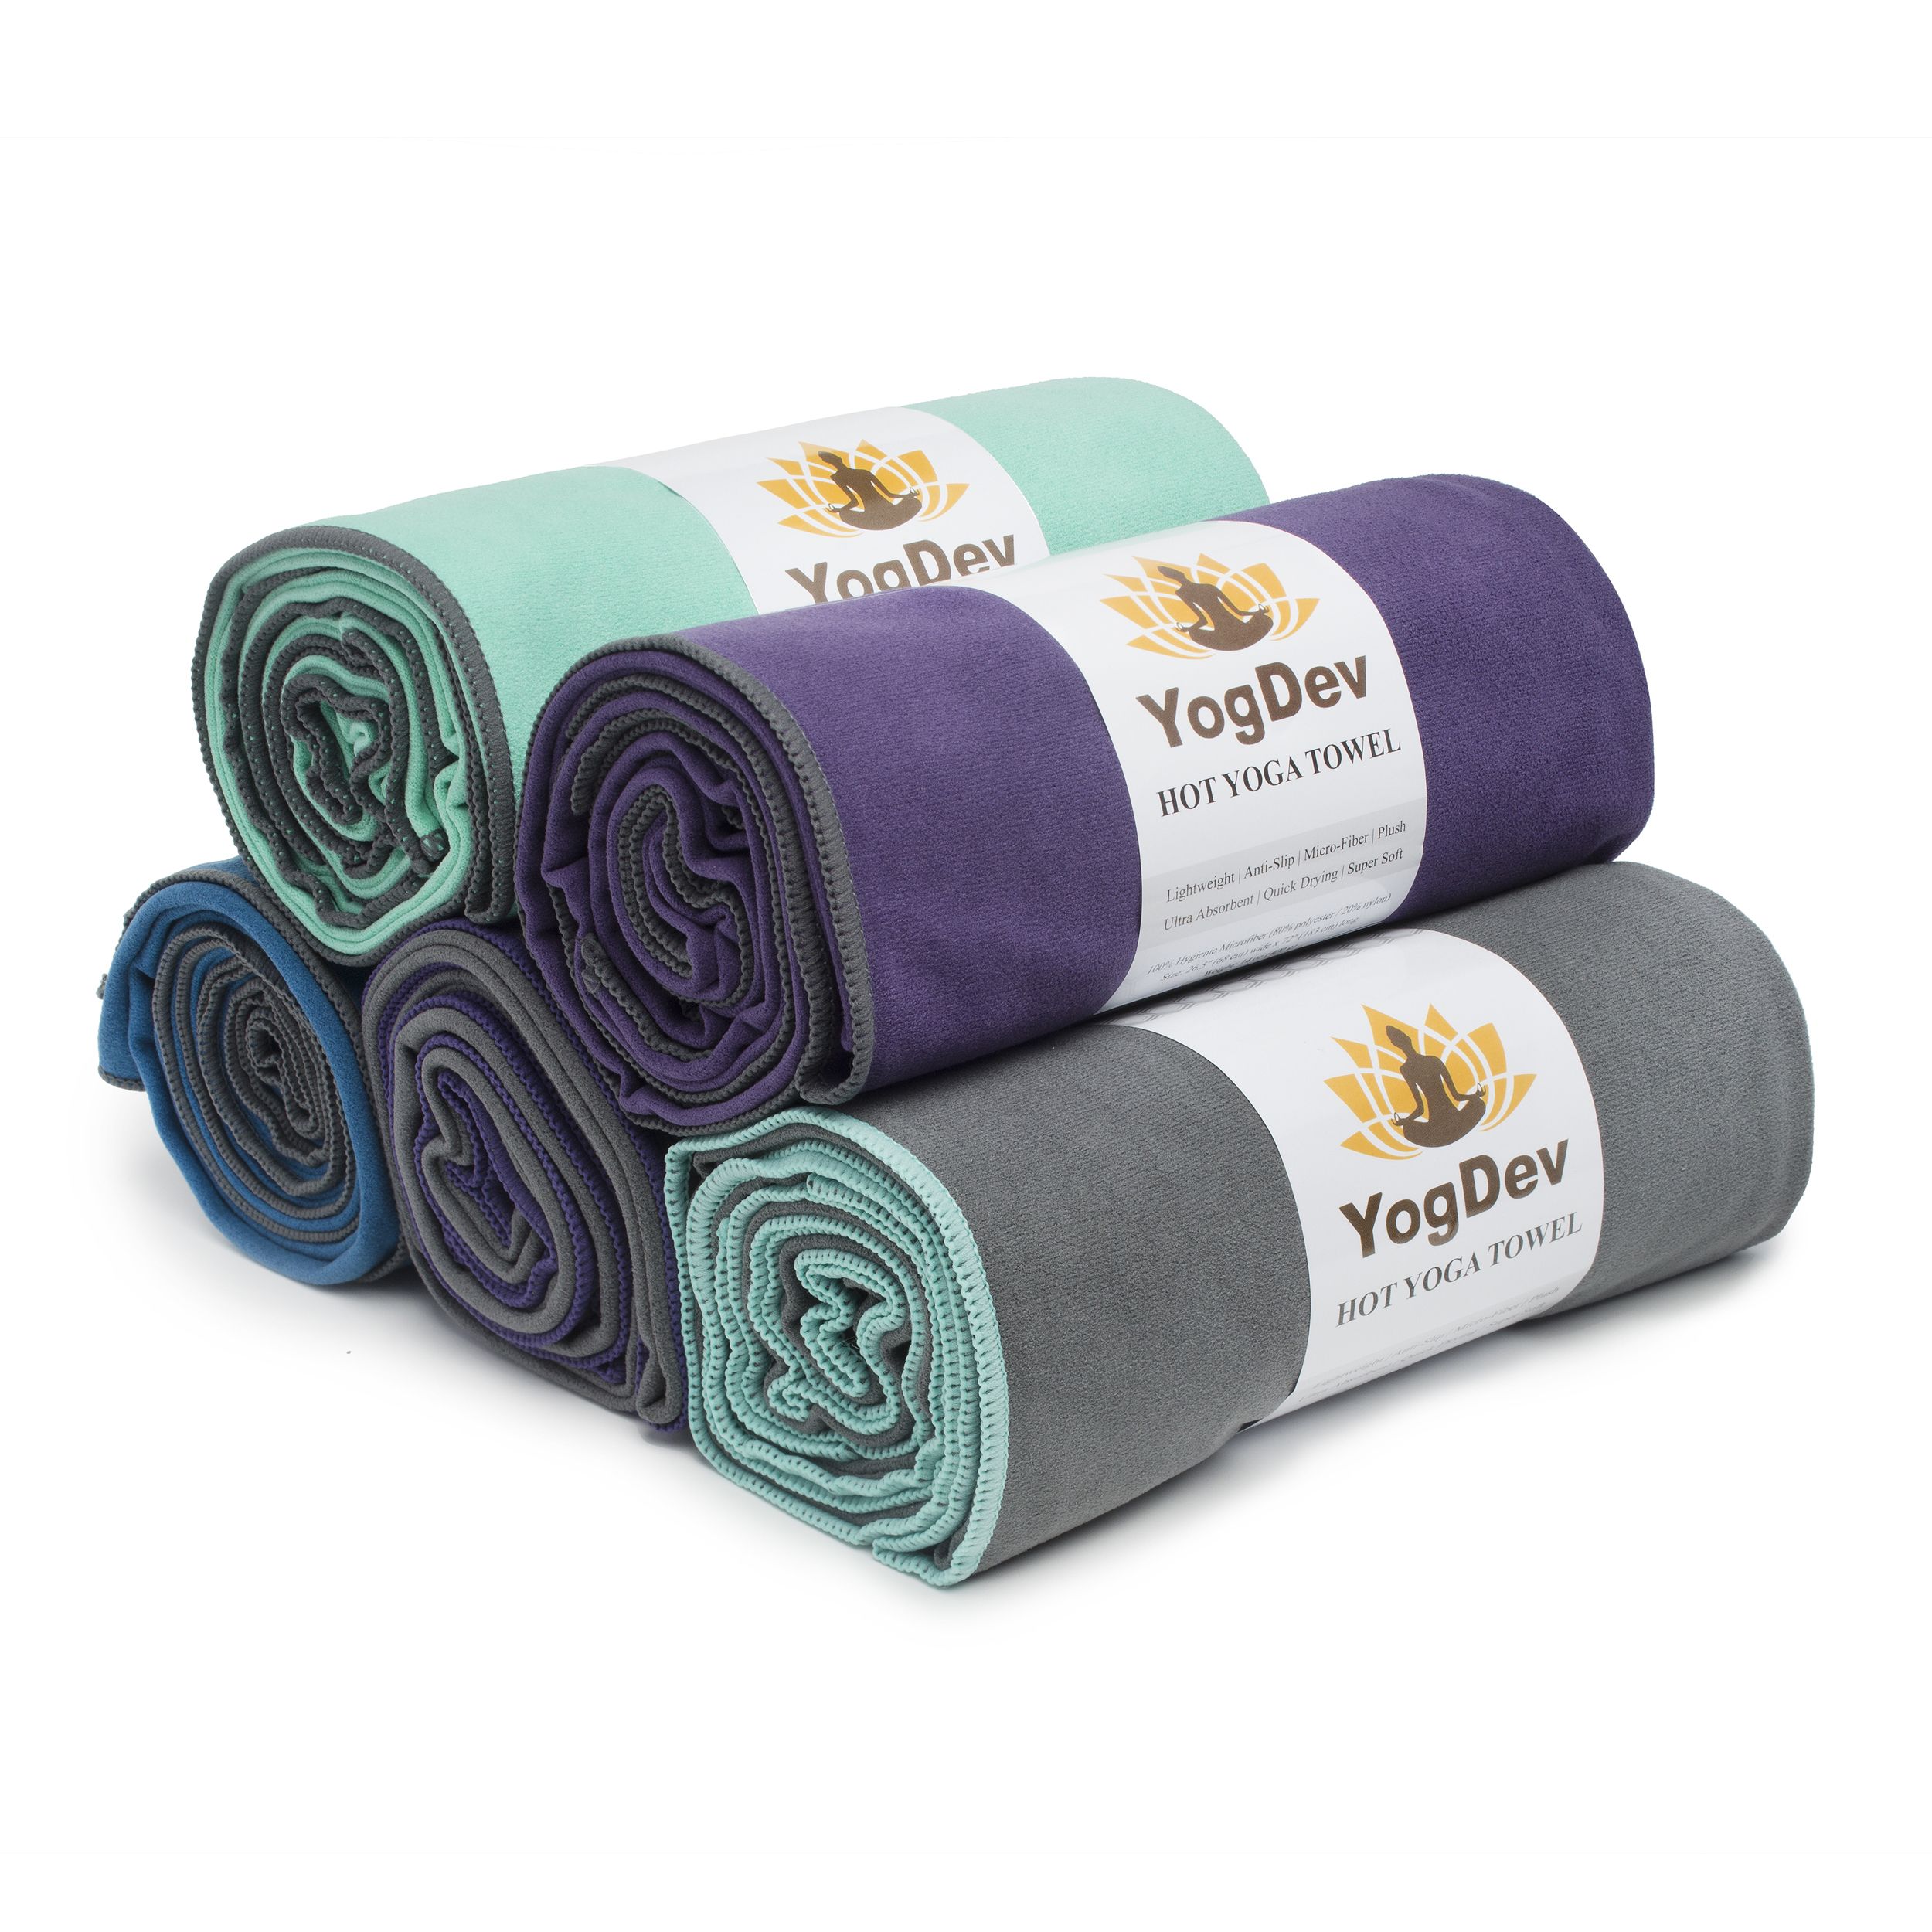 Be fresh with yoga towels